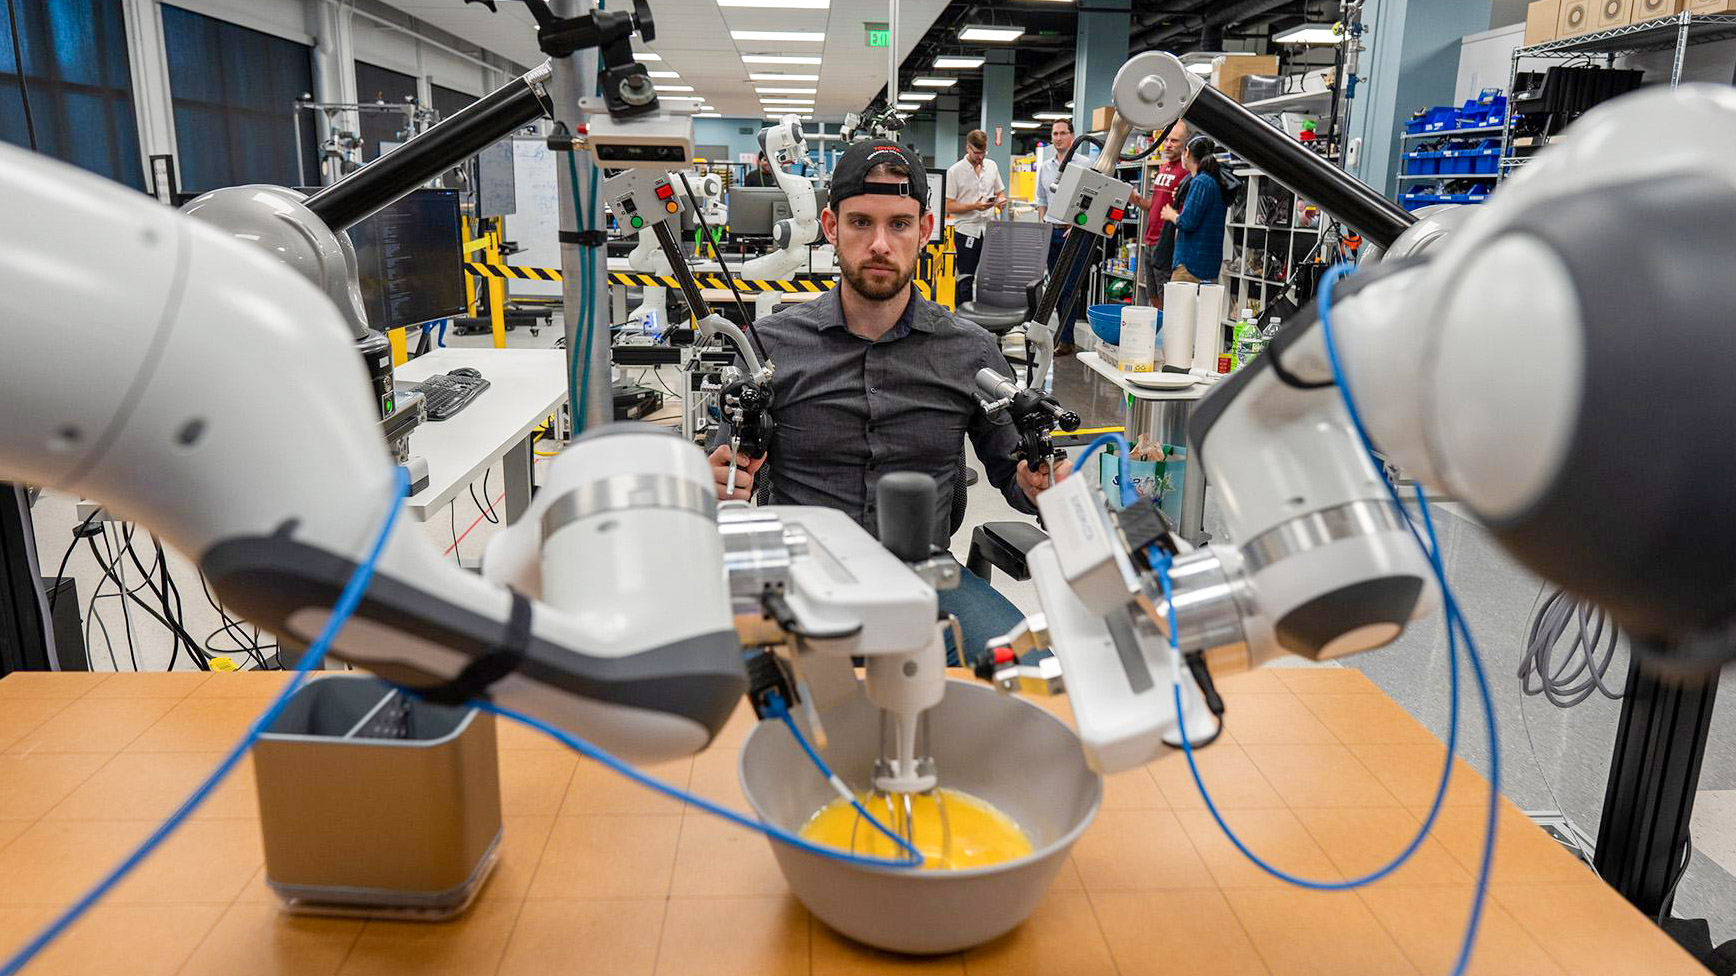 a researcher controls robot arms fitted with whisk attachment beating eggs in a workshop environment